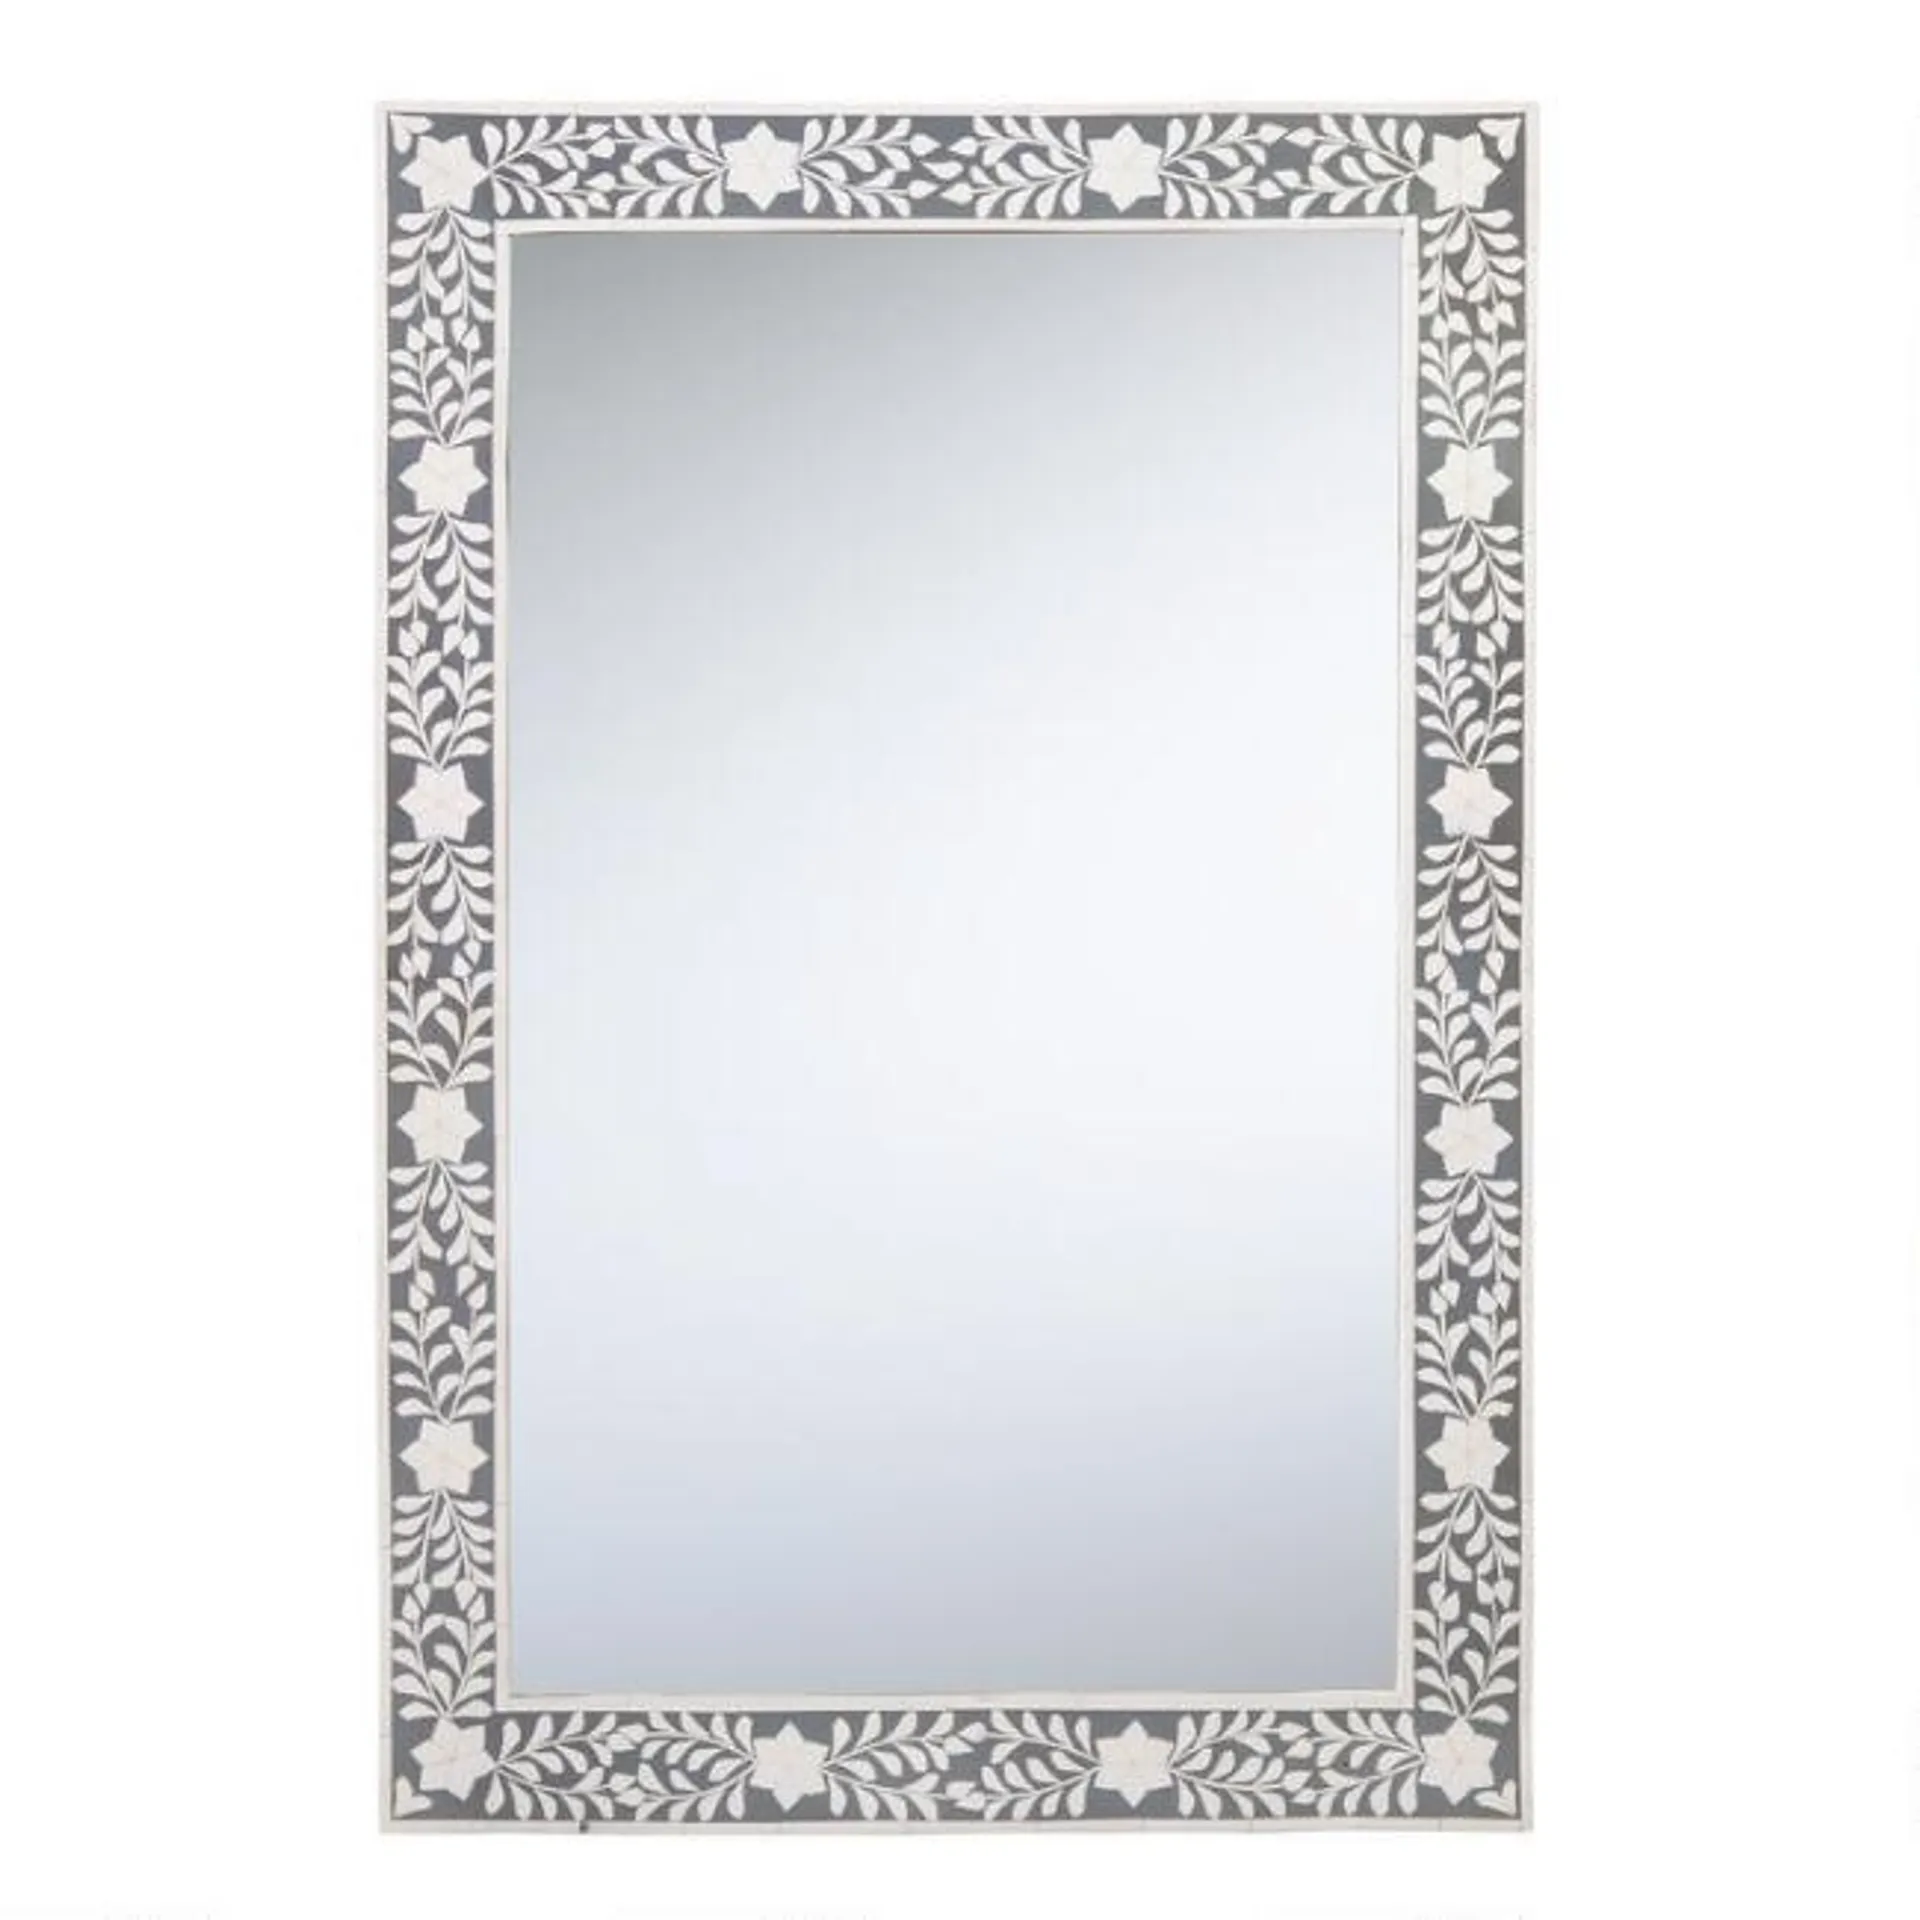 Gray and White Floral Inlay Wall Mirror